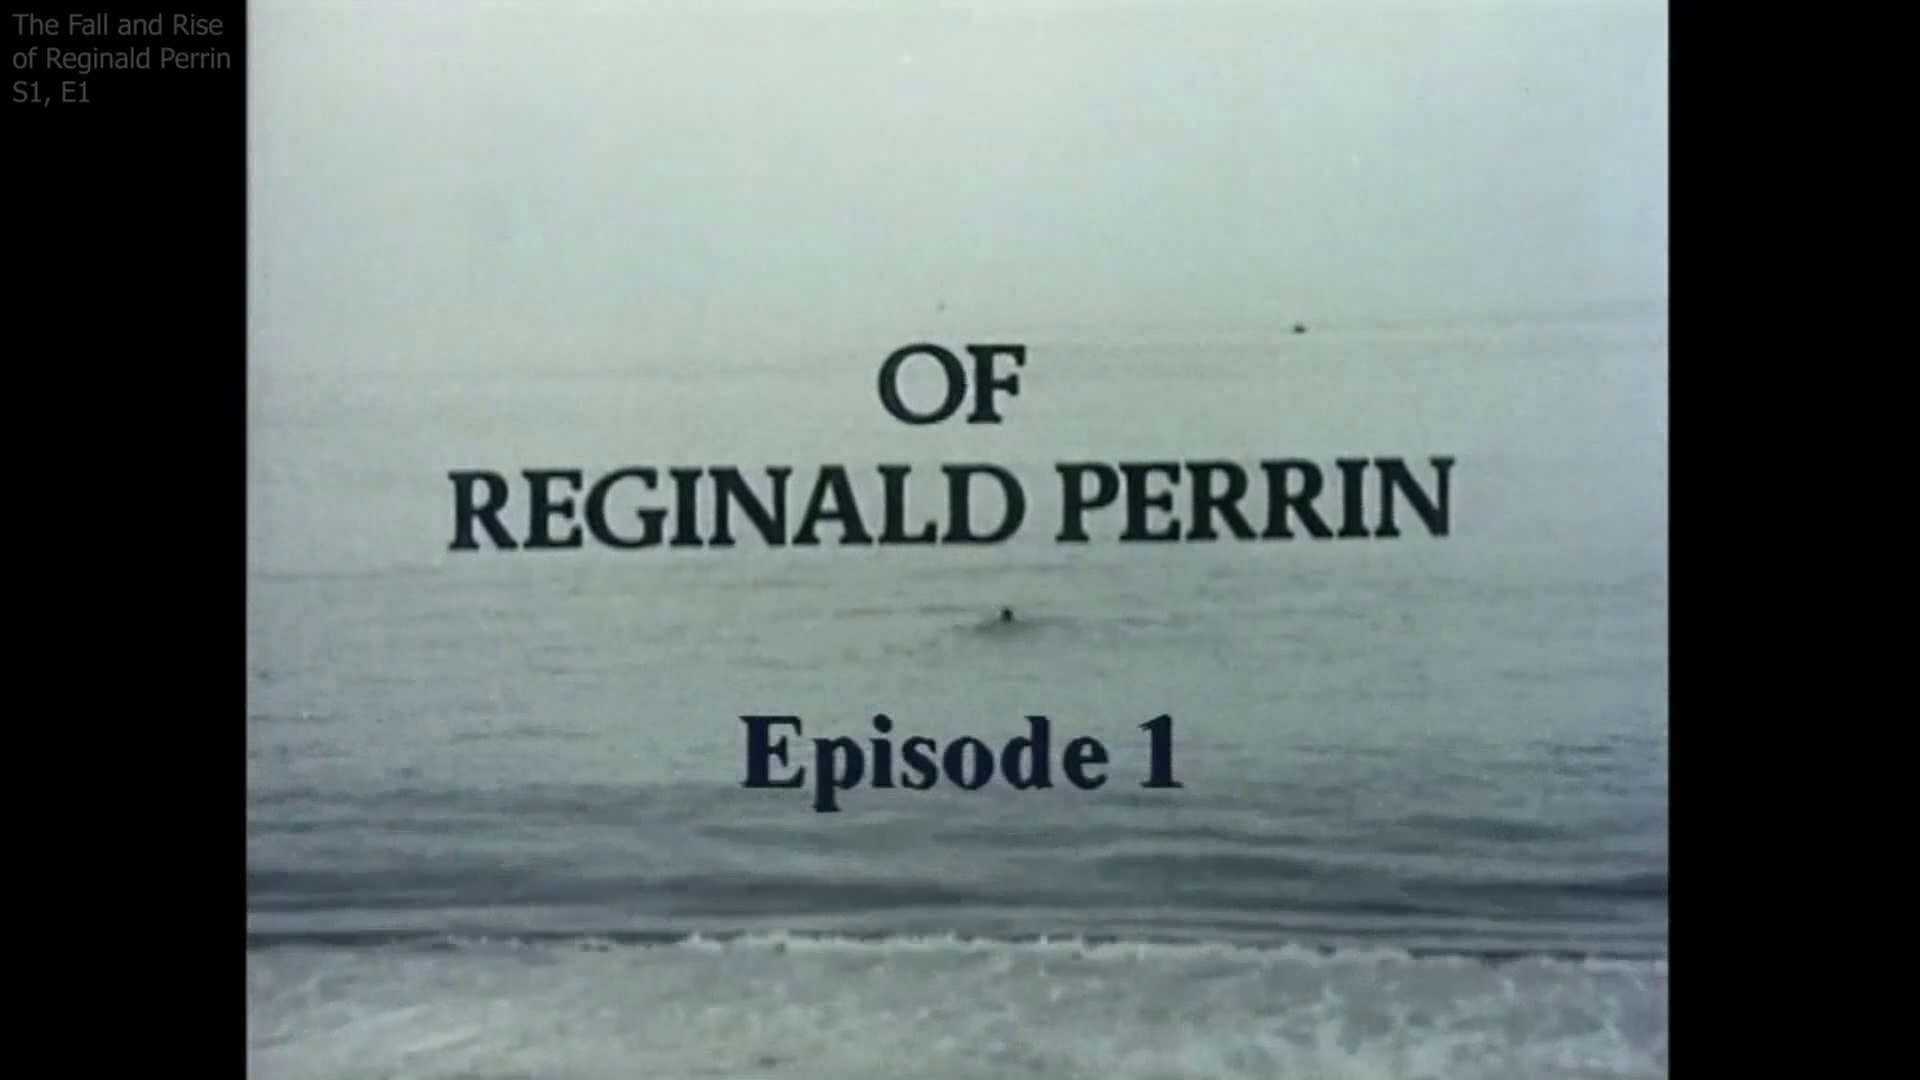 The Fall and Rise of Reginald Perrin - Series 1 Episode 1